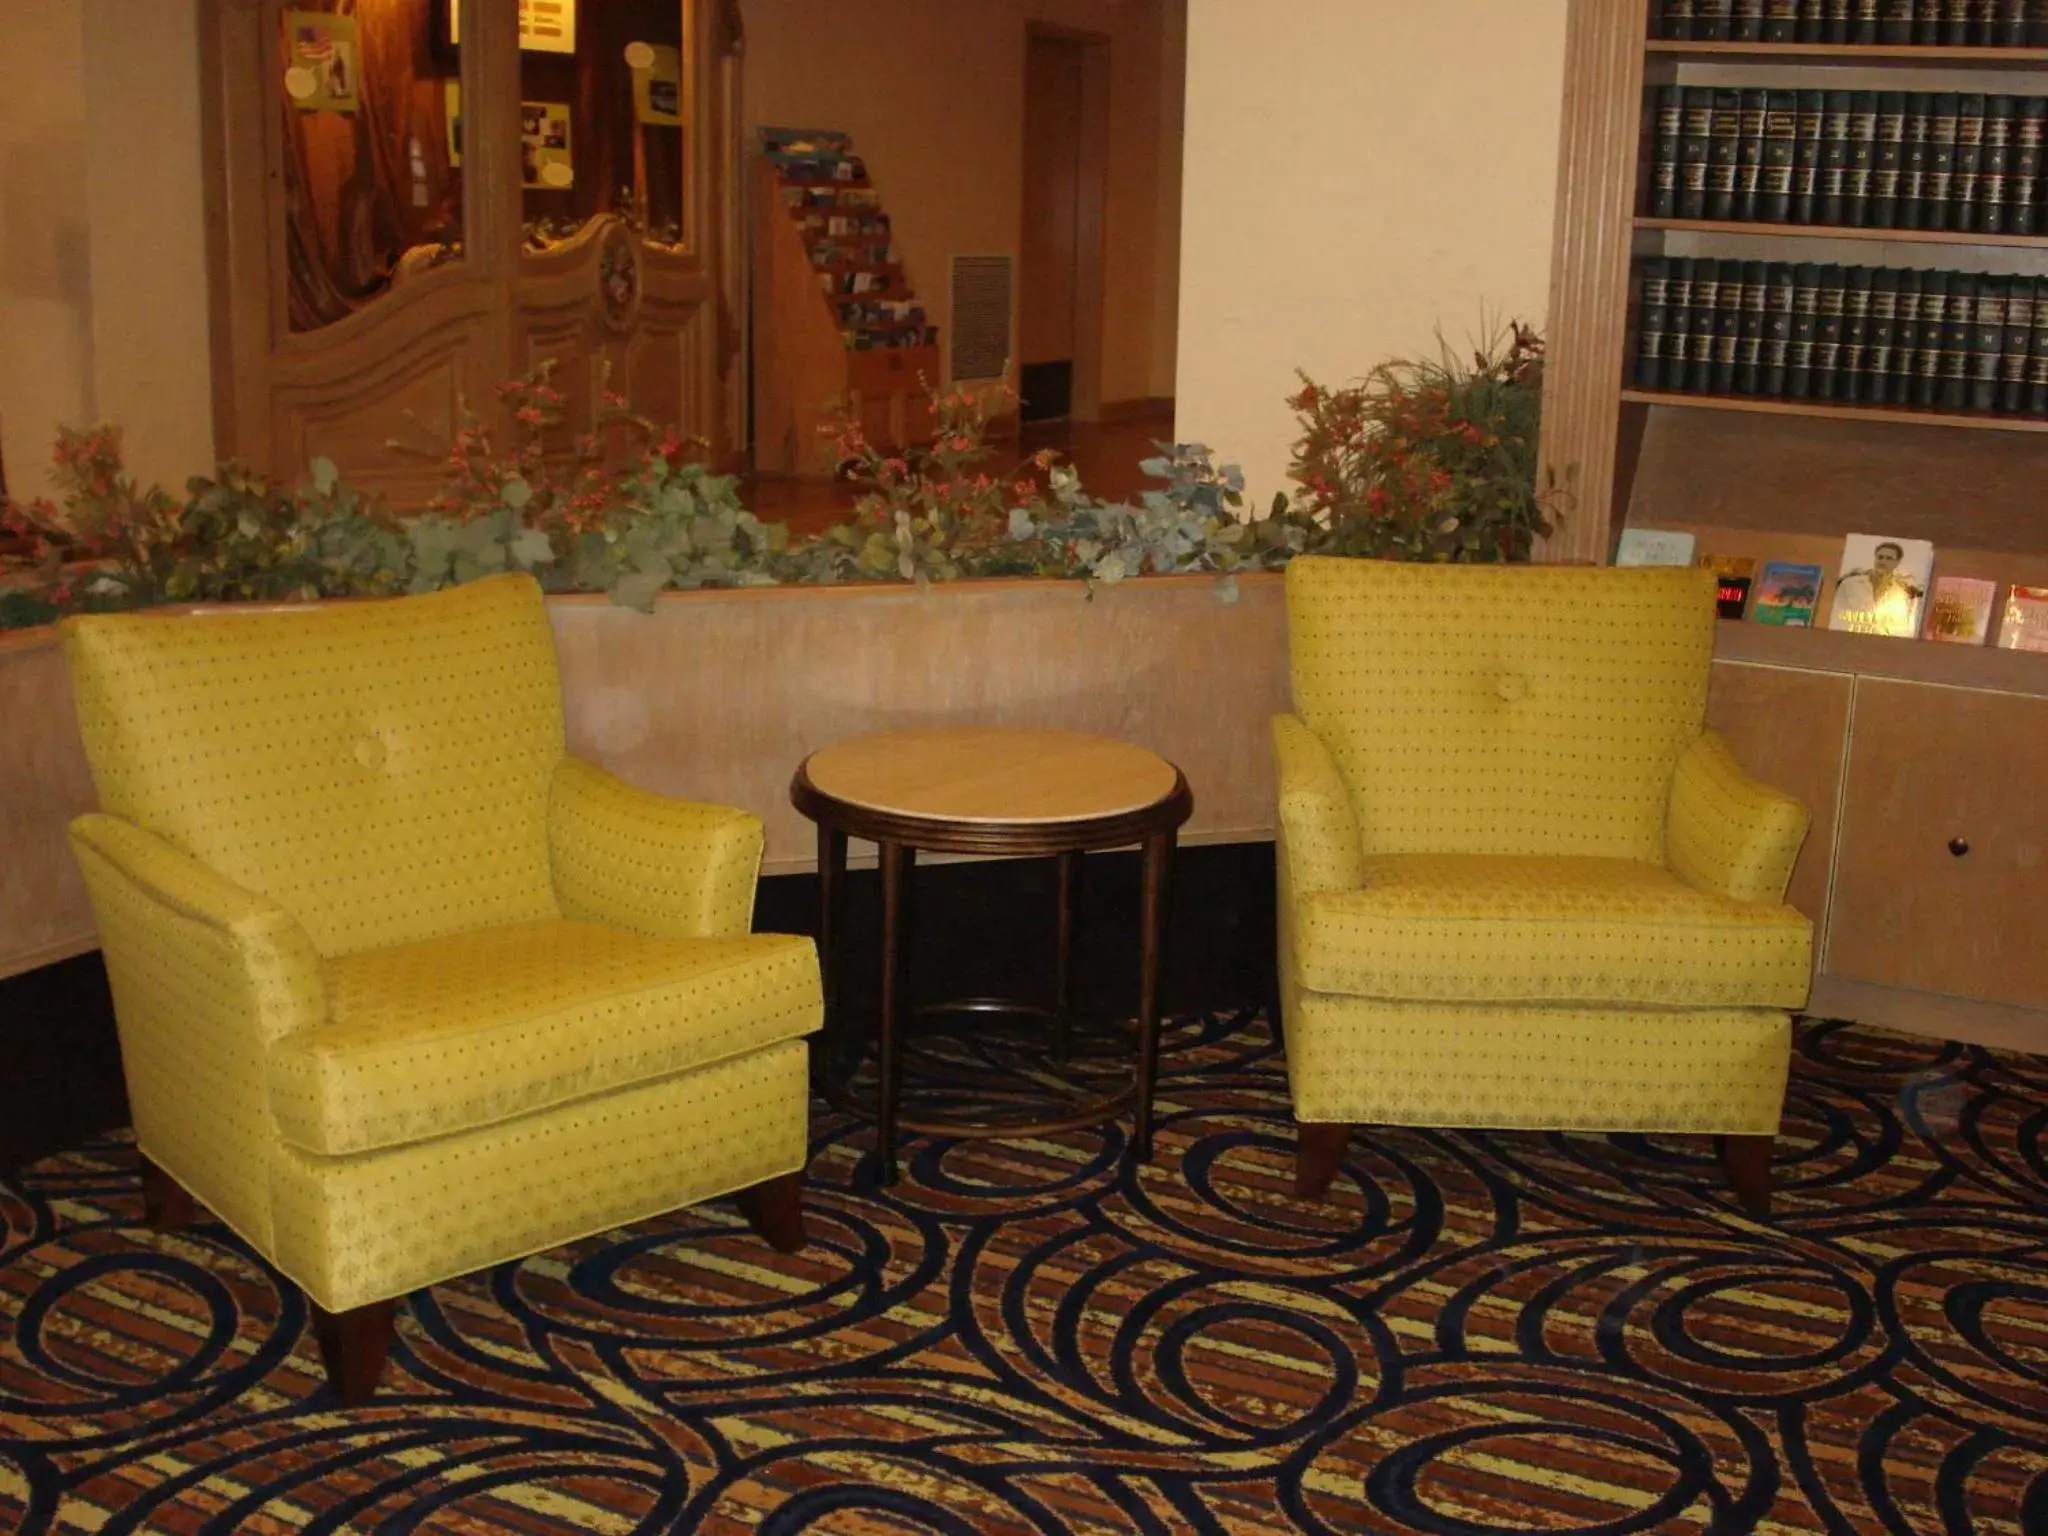 Lobby or reception in The Chateau Bloomington Hotel and Conference Center